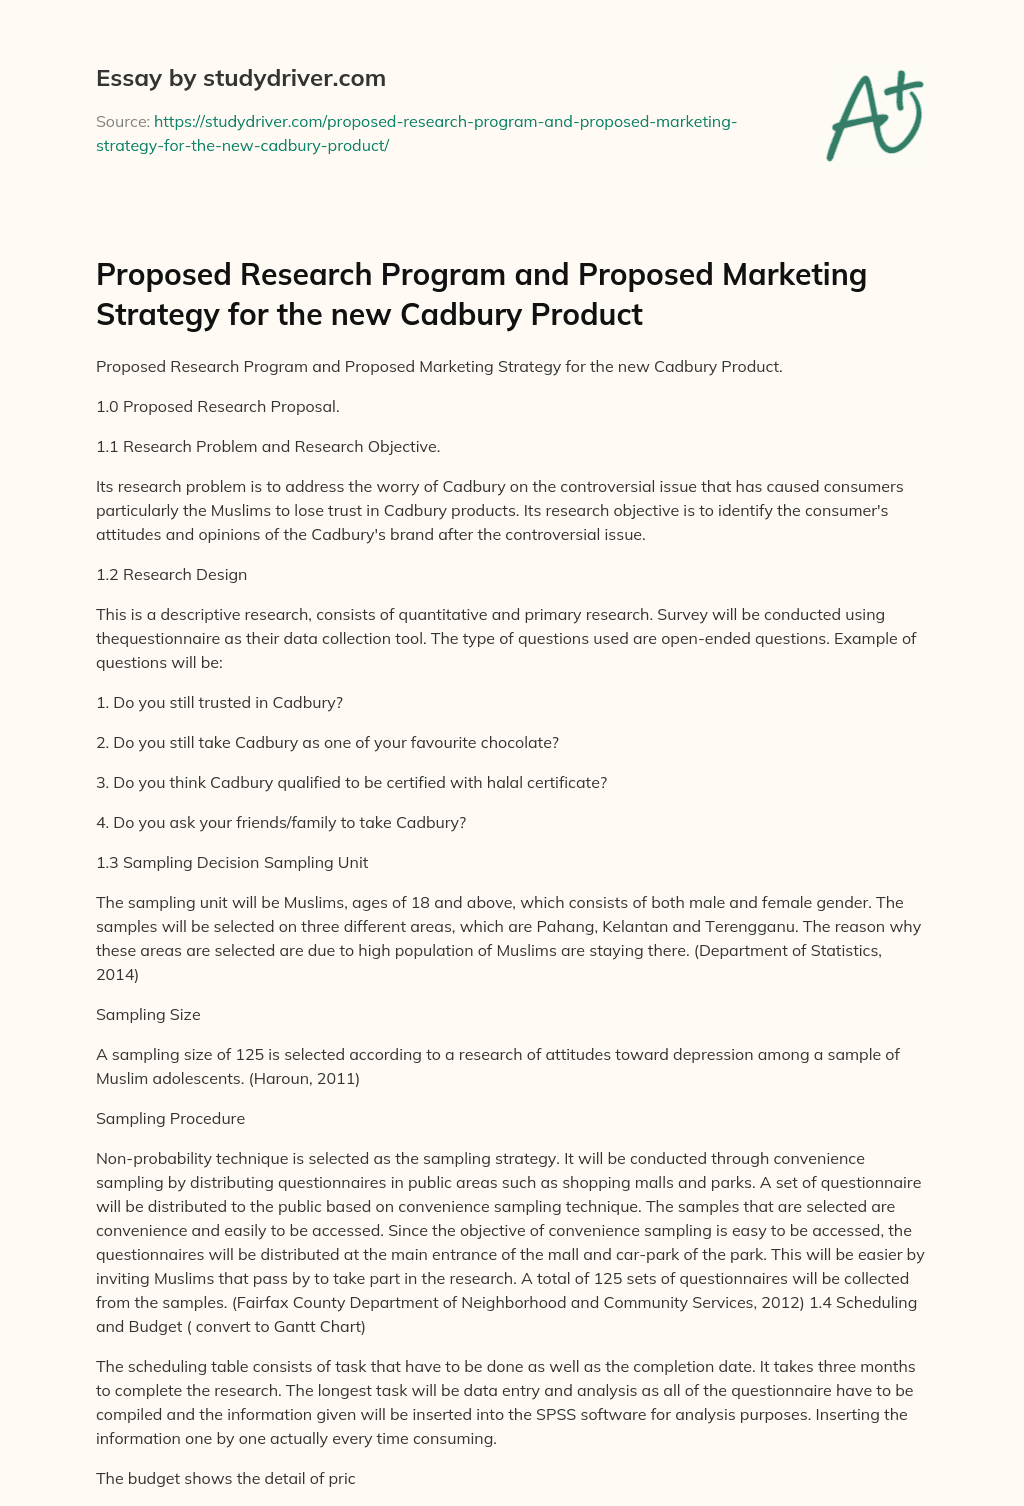 Proposed Research Program and Proposed Marketing Strategy for the New Cadbury Product essay